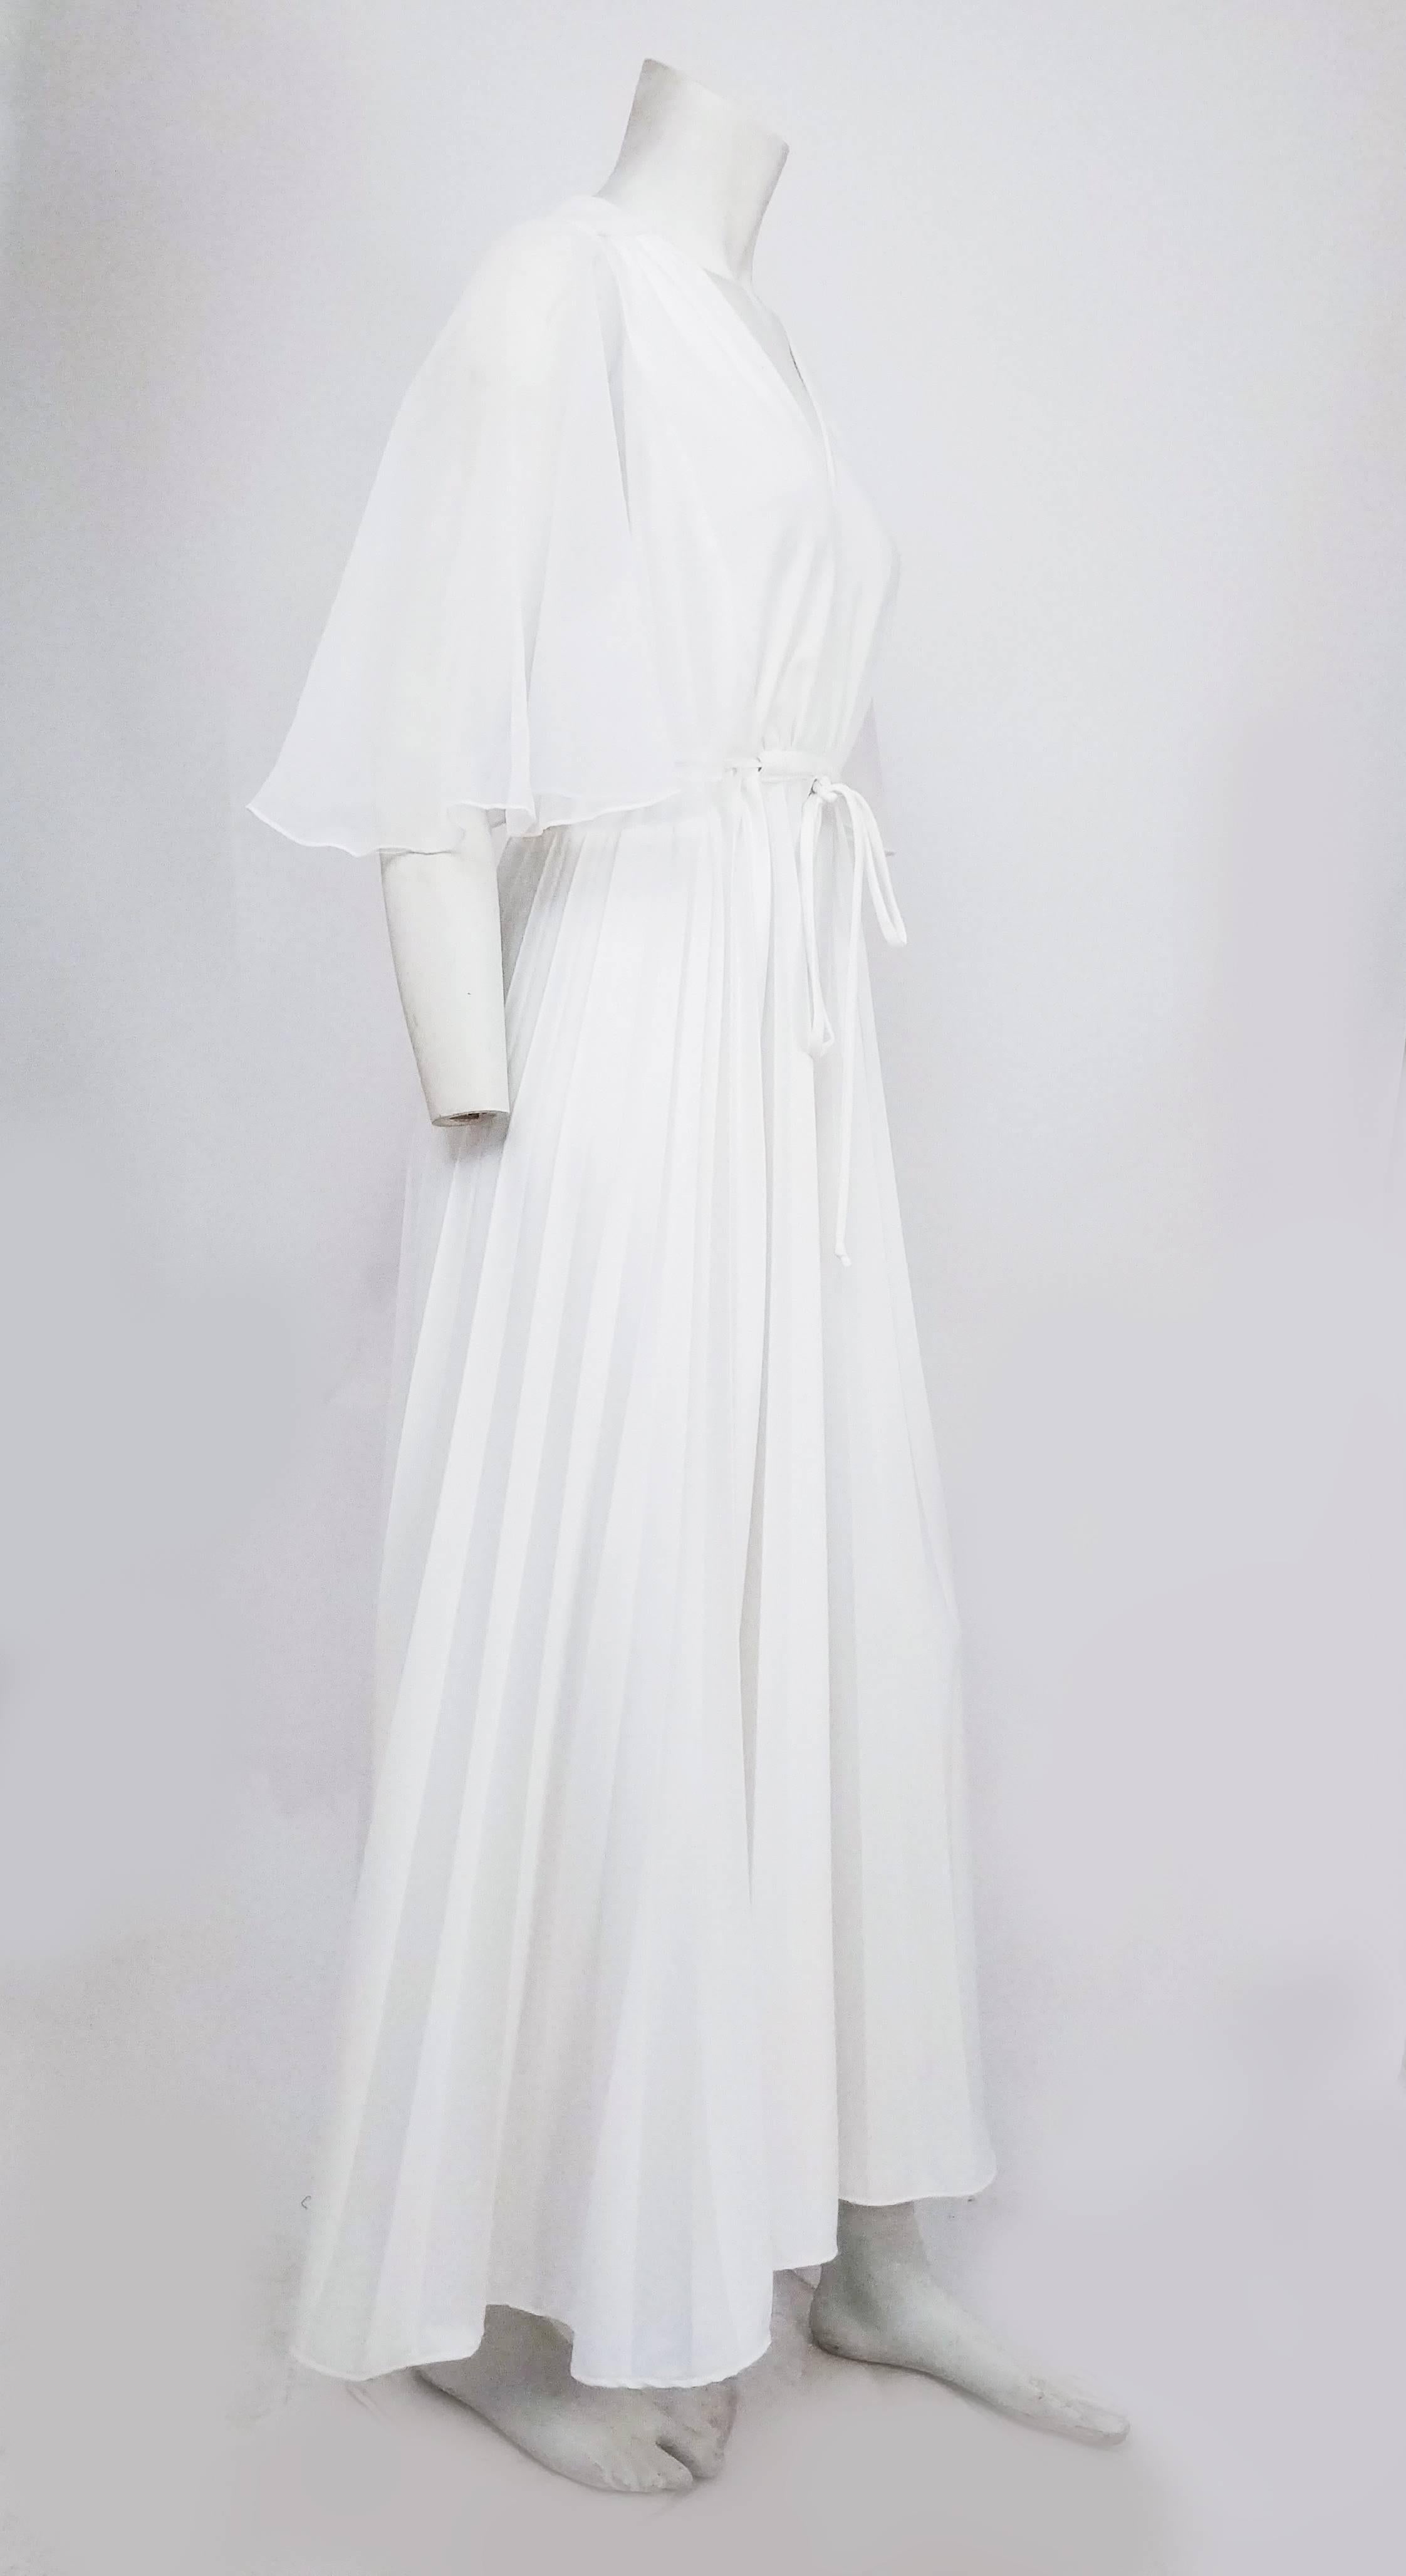 1970s White Chiffon Evening Dress. Flowing cape sleeves, adjustable waist ties at back, gathered Grecian style skirt. 